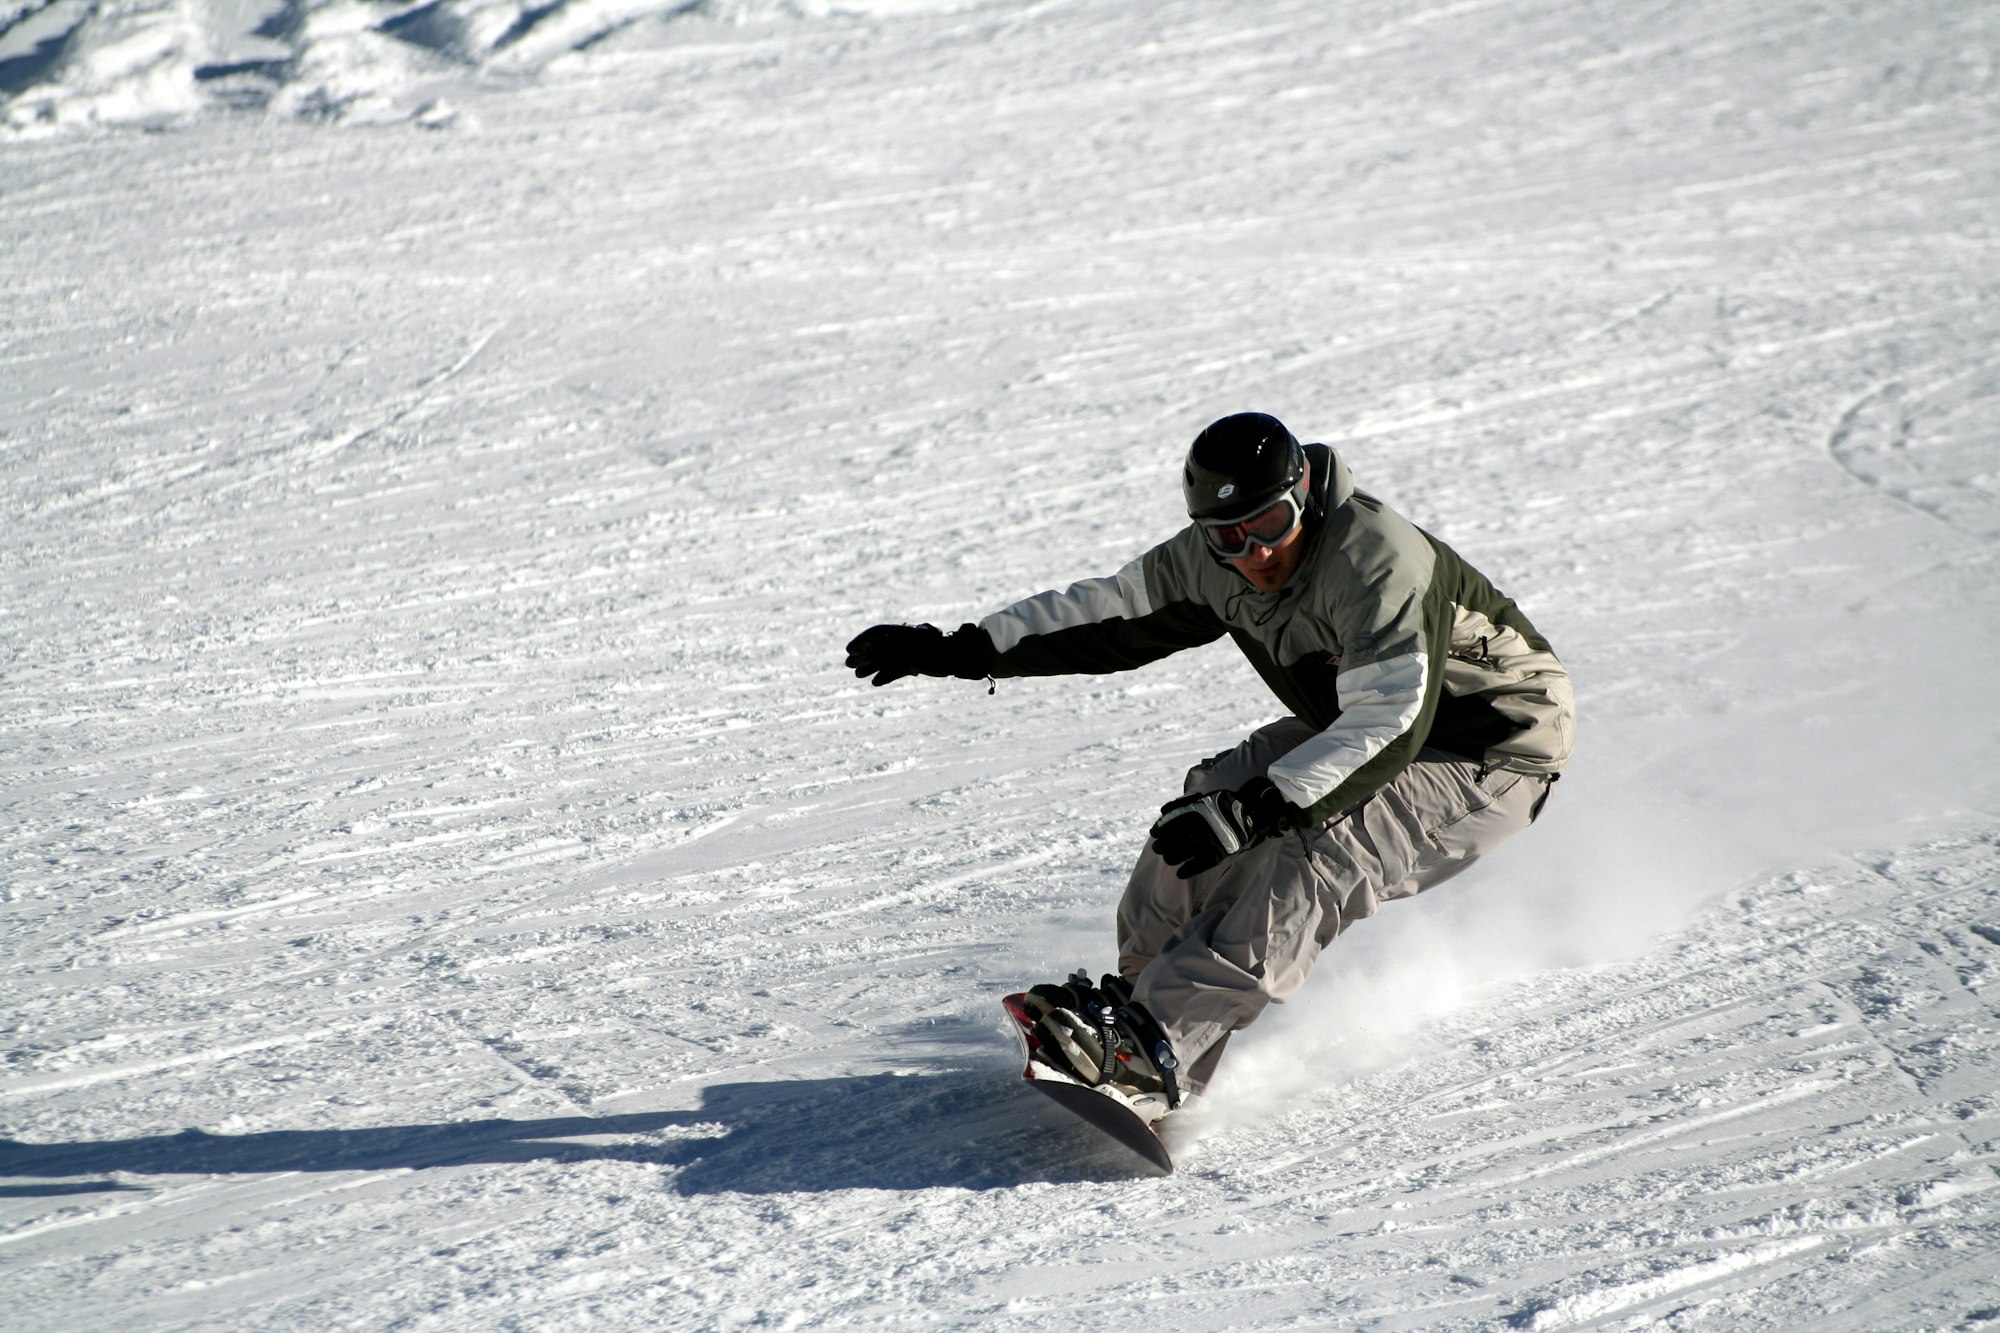 How Long Does It Take to Learn to Snowboard